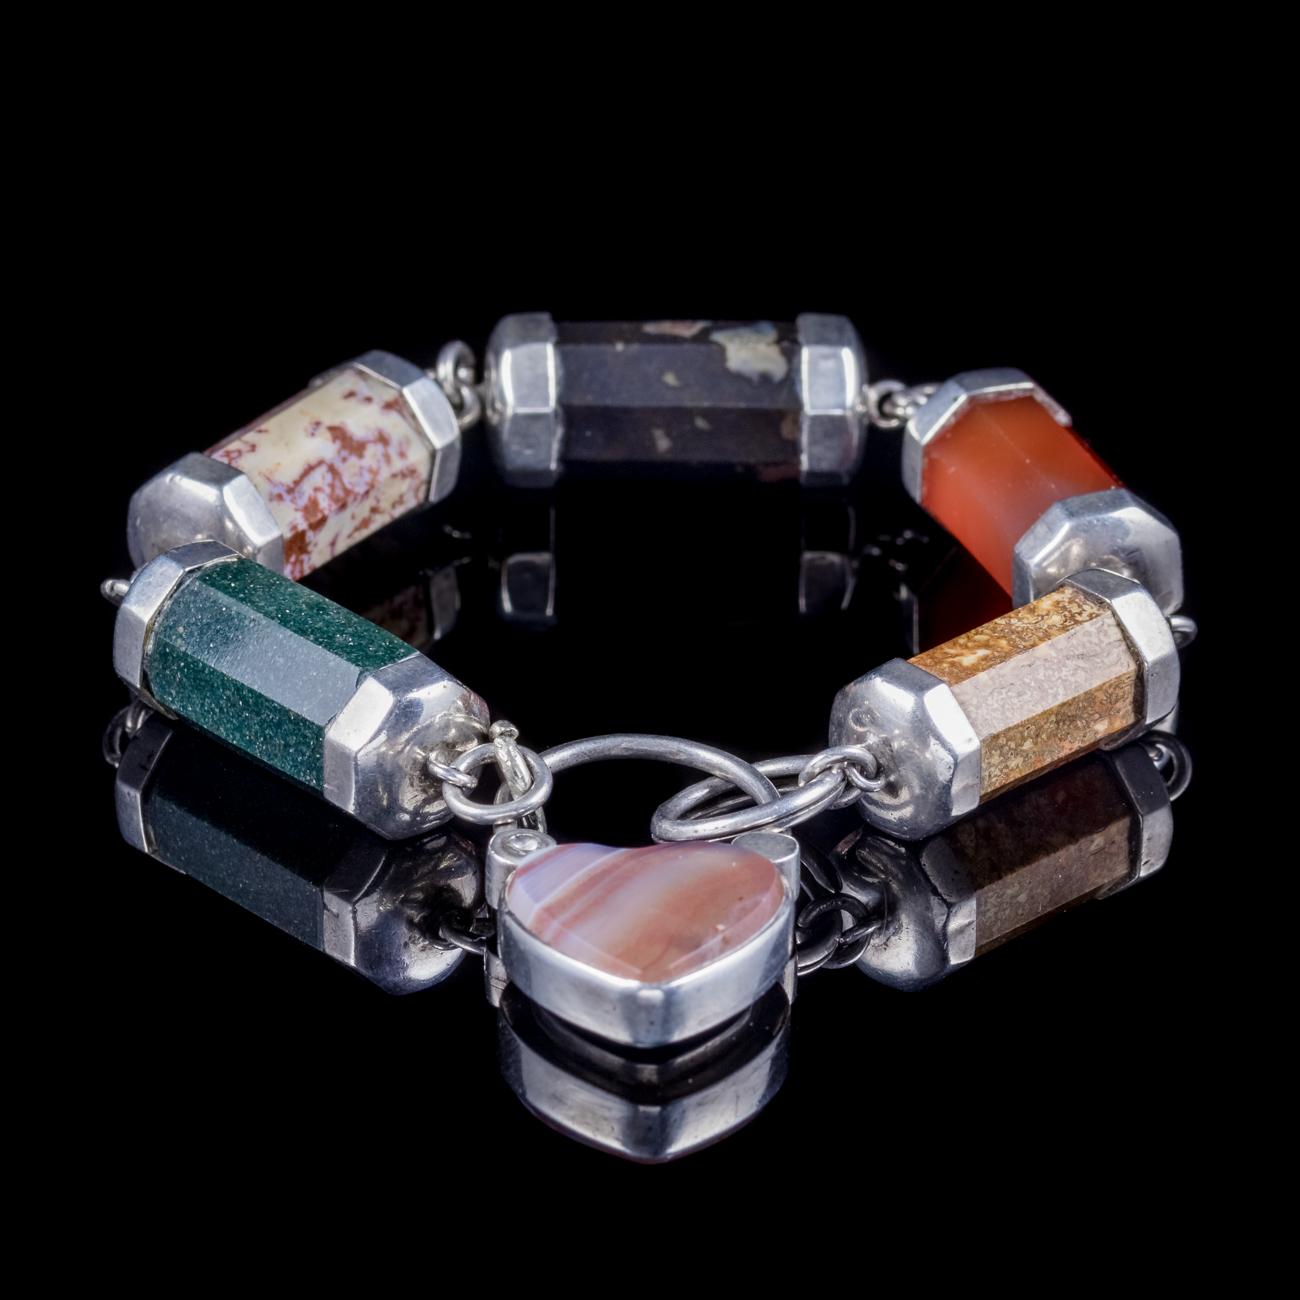 A wonderful antique Scottish Bracelet C. 1860 made up of colourful Barrel Agate links leading to a fabulous padlock charm set with an Agate heart and a Locket on the reverse.  Scottish jewellery was made popular by Queen Victoria as it became a